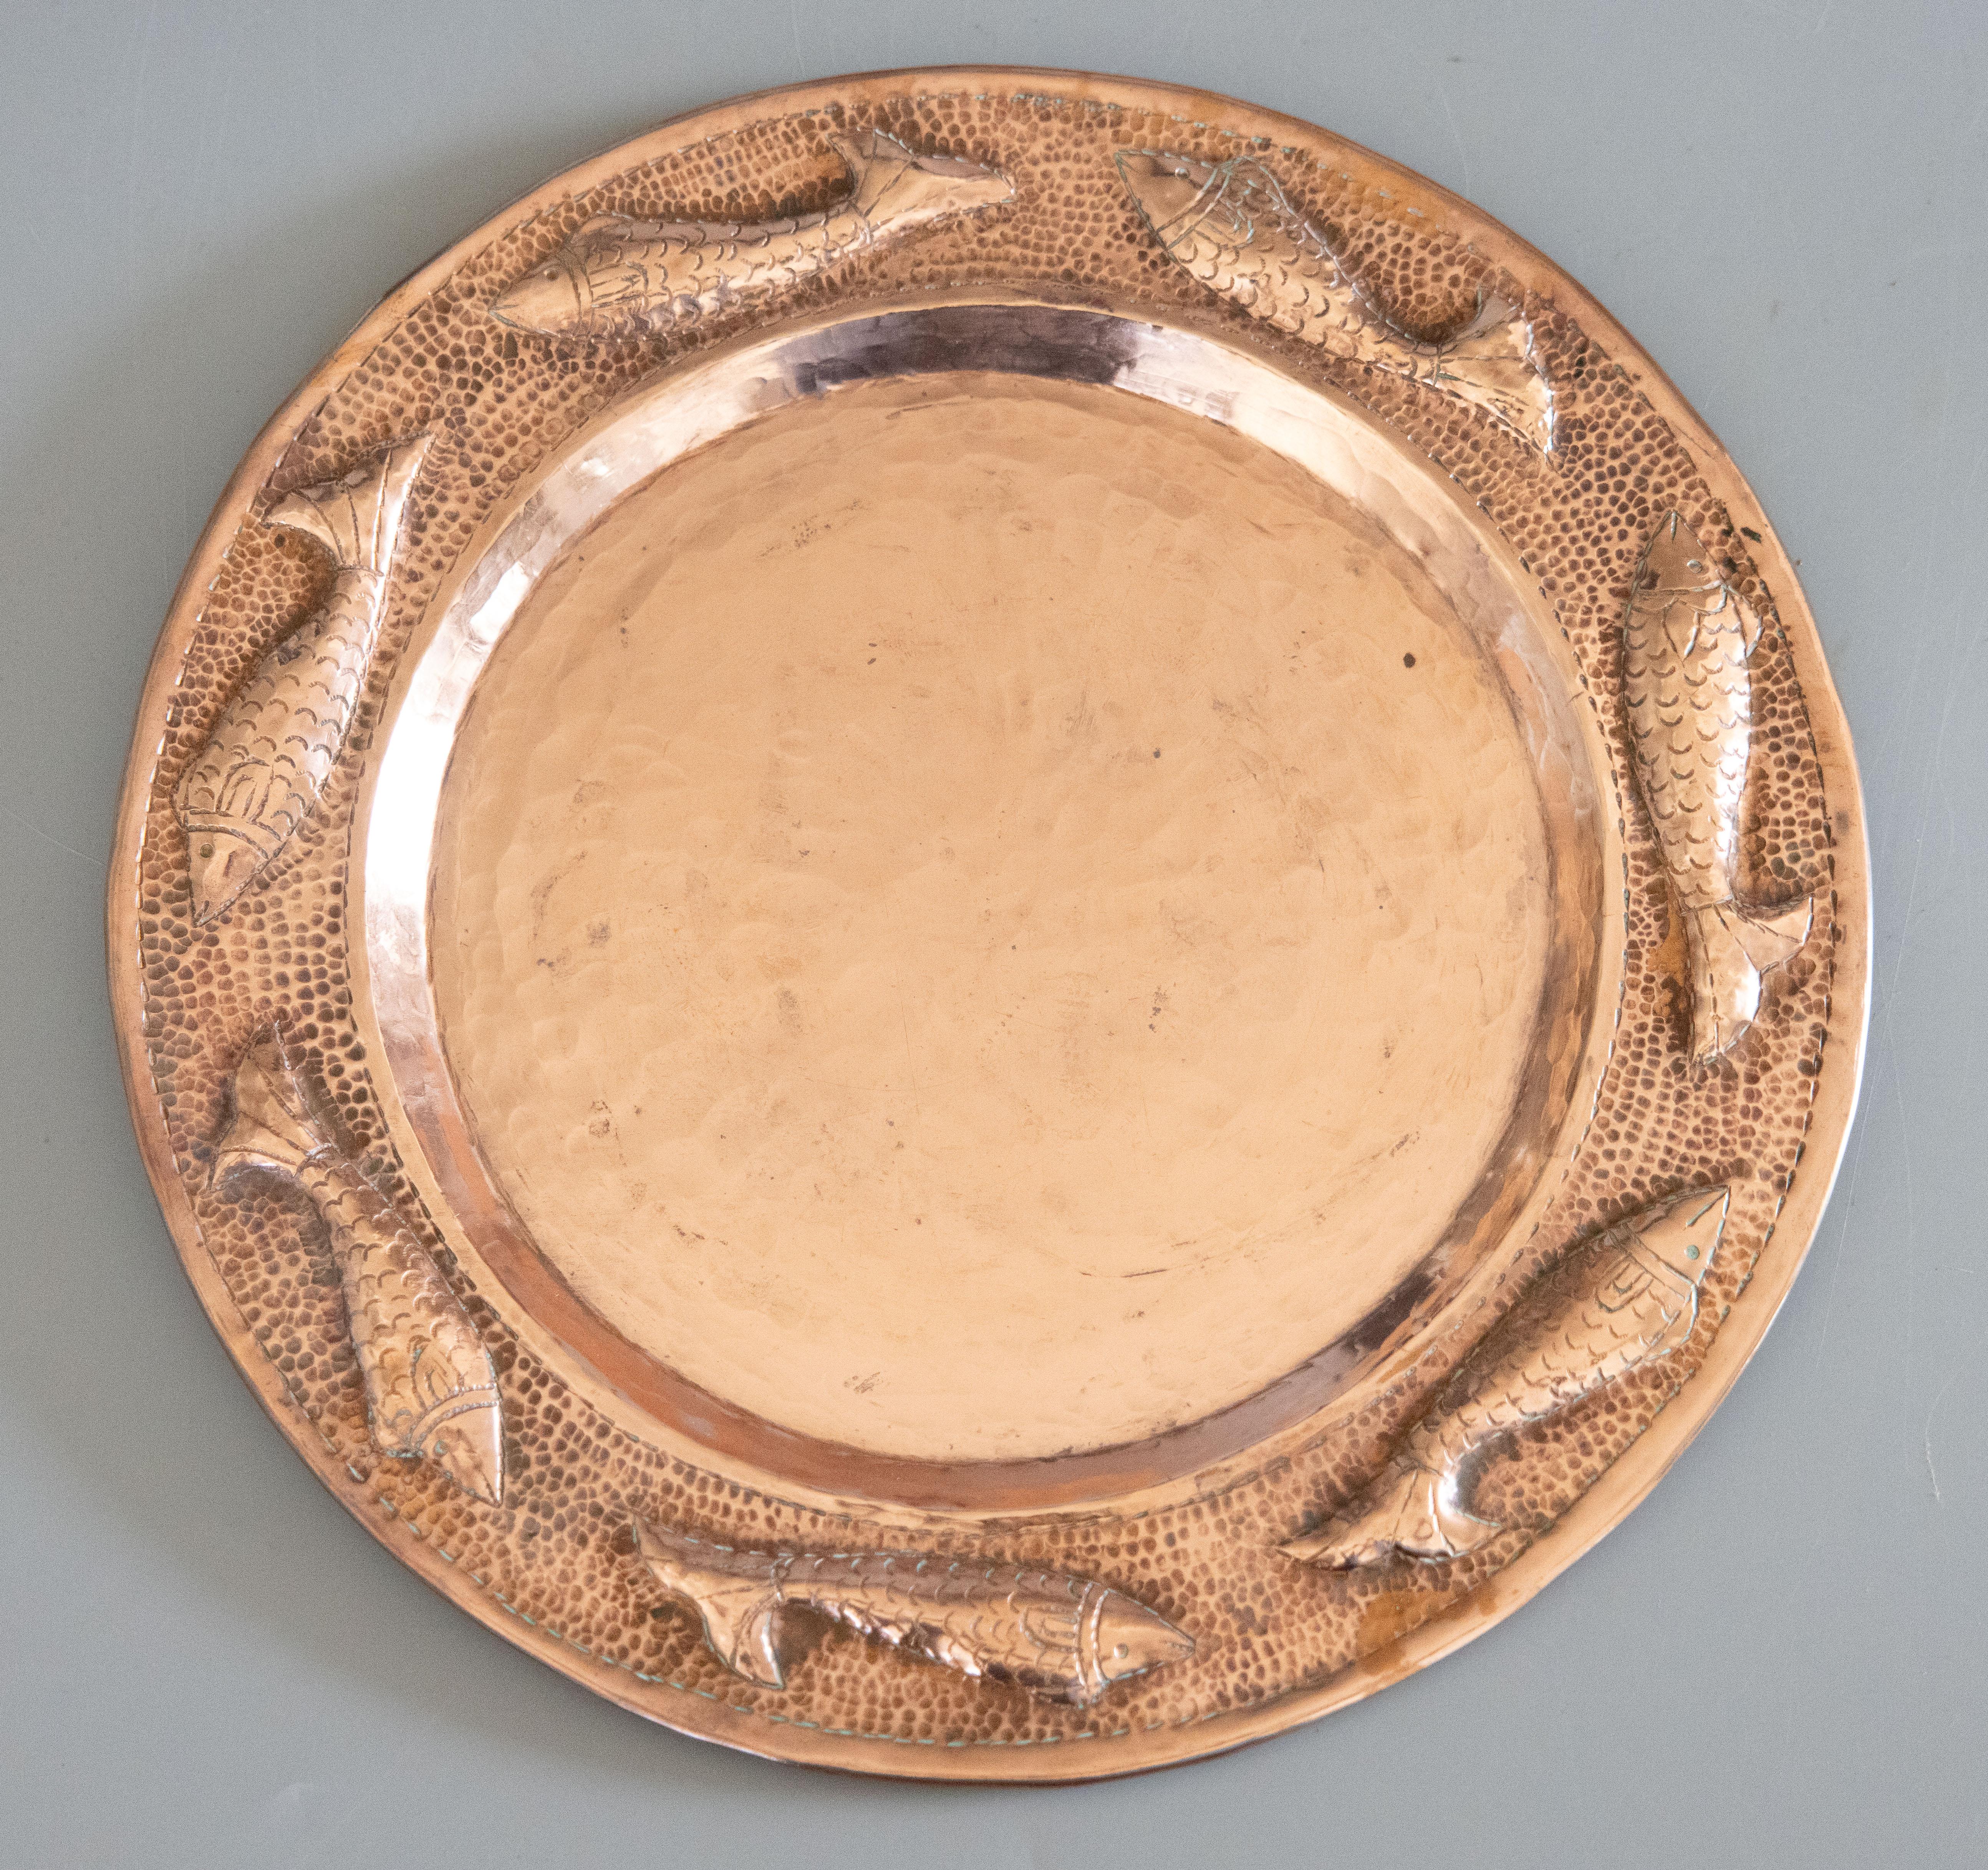 A lovely Mid-Century French repoussé hammered copper charger / plate / plaque / wall hanging from Paris, France, circa 1950. It has a charming fish border, hand hammered design in an aged copper patina, and it displays